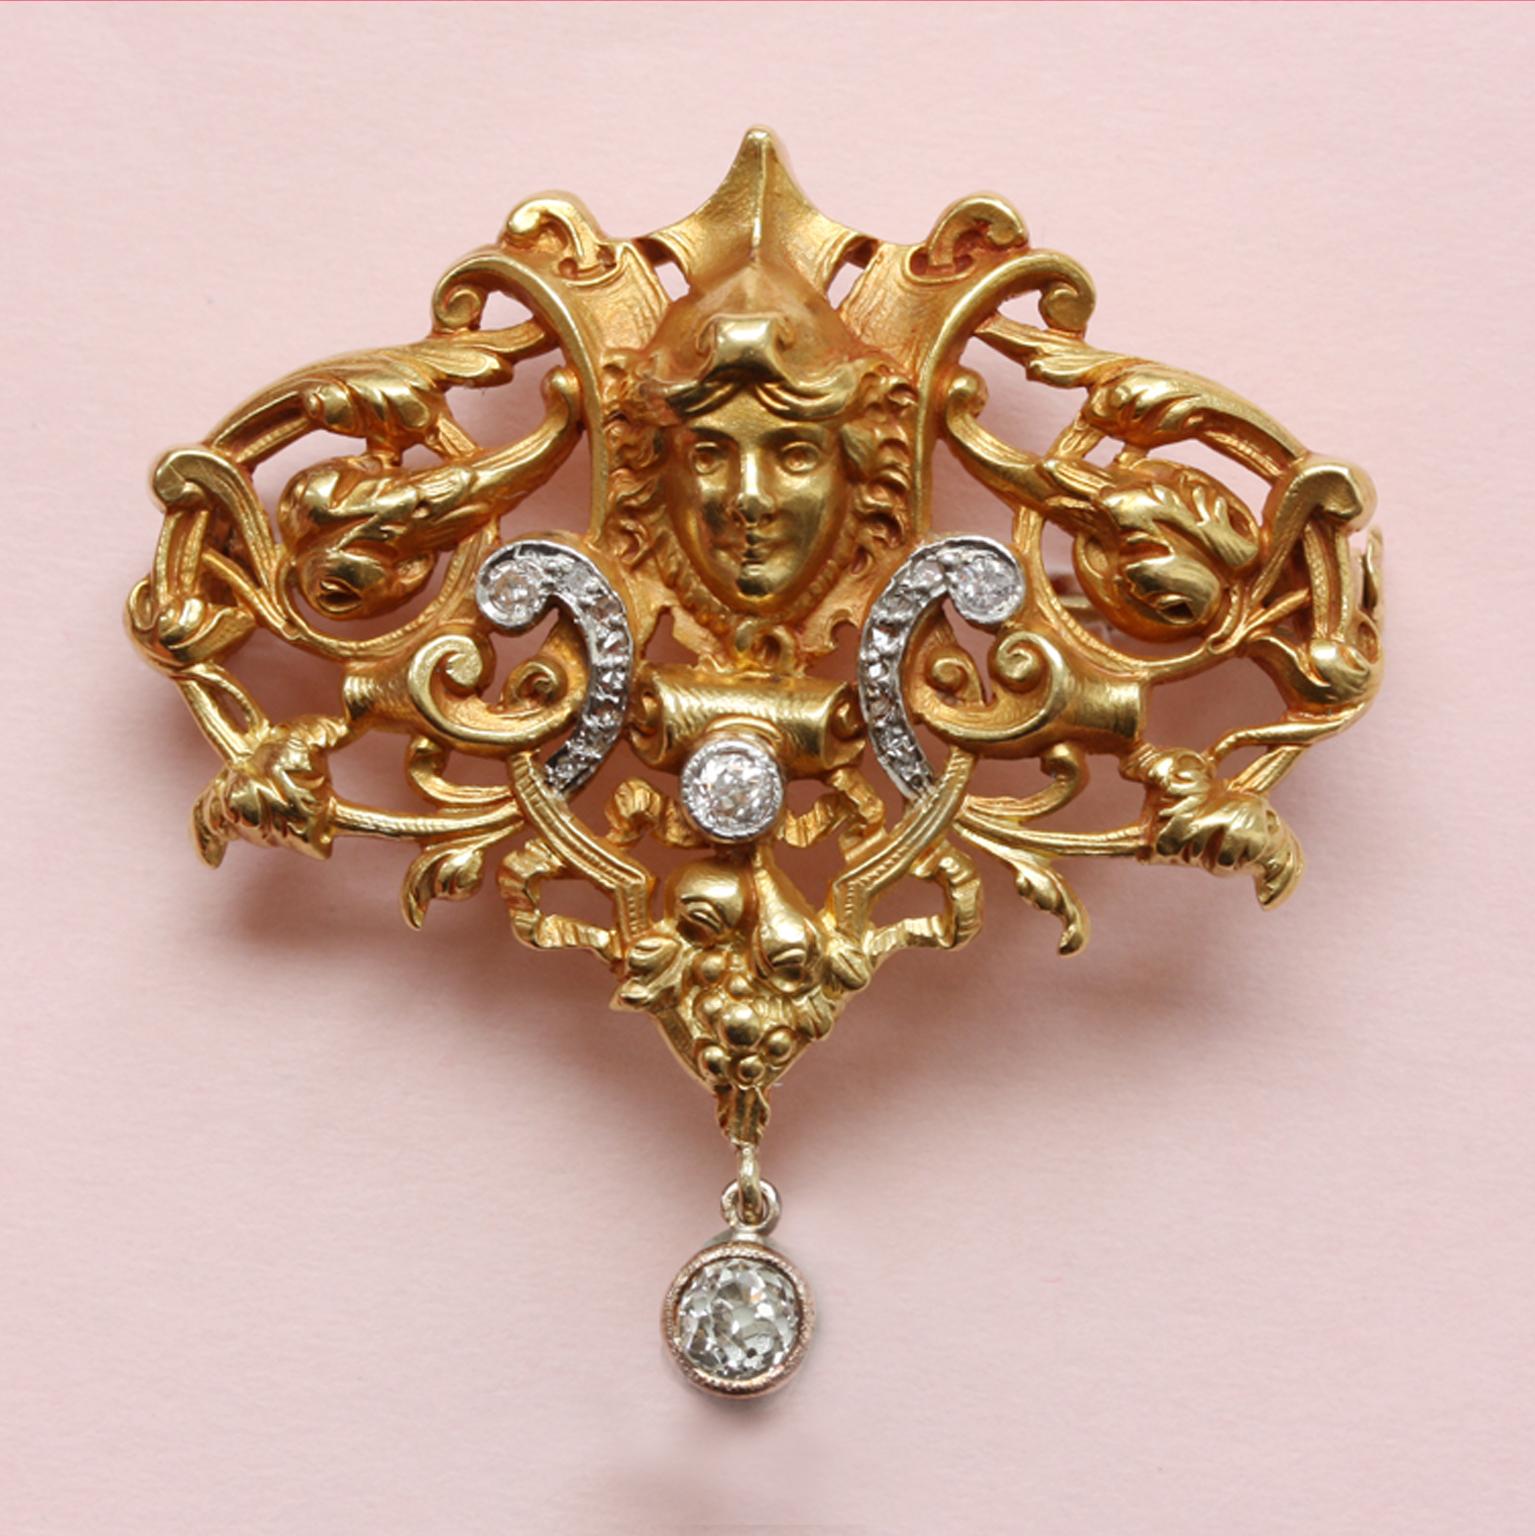 An 18-carat gold, openwork mascaron and scroll brooch centring a lady with an elaborate foliate and floral design, highlighted by two scrolls set with old-cut diamonds and a diamond drop, mille griffe set. Most likely France, circa 1890. The gold